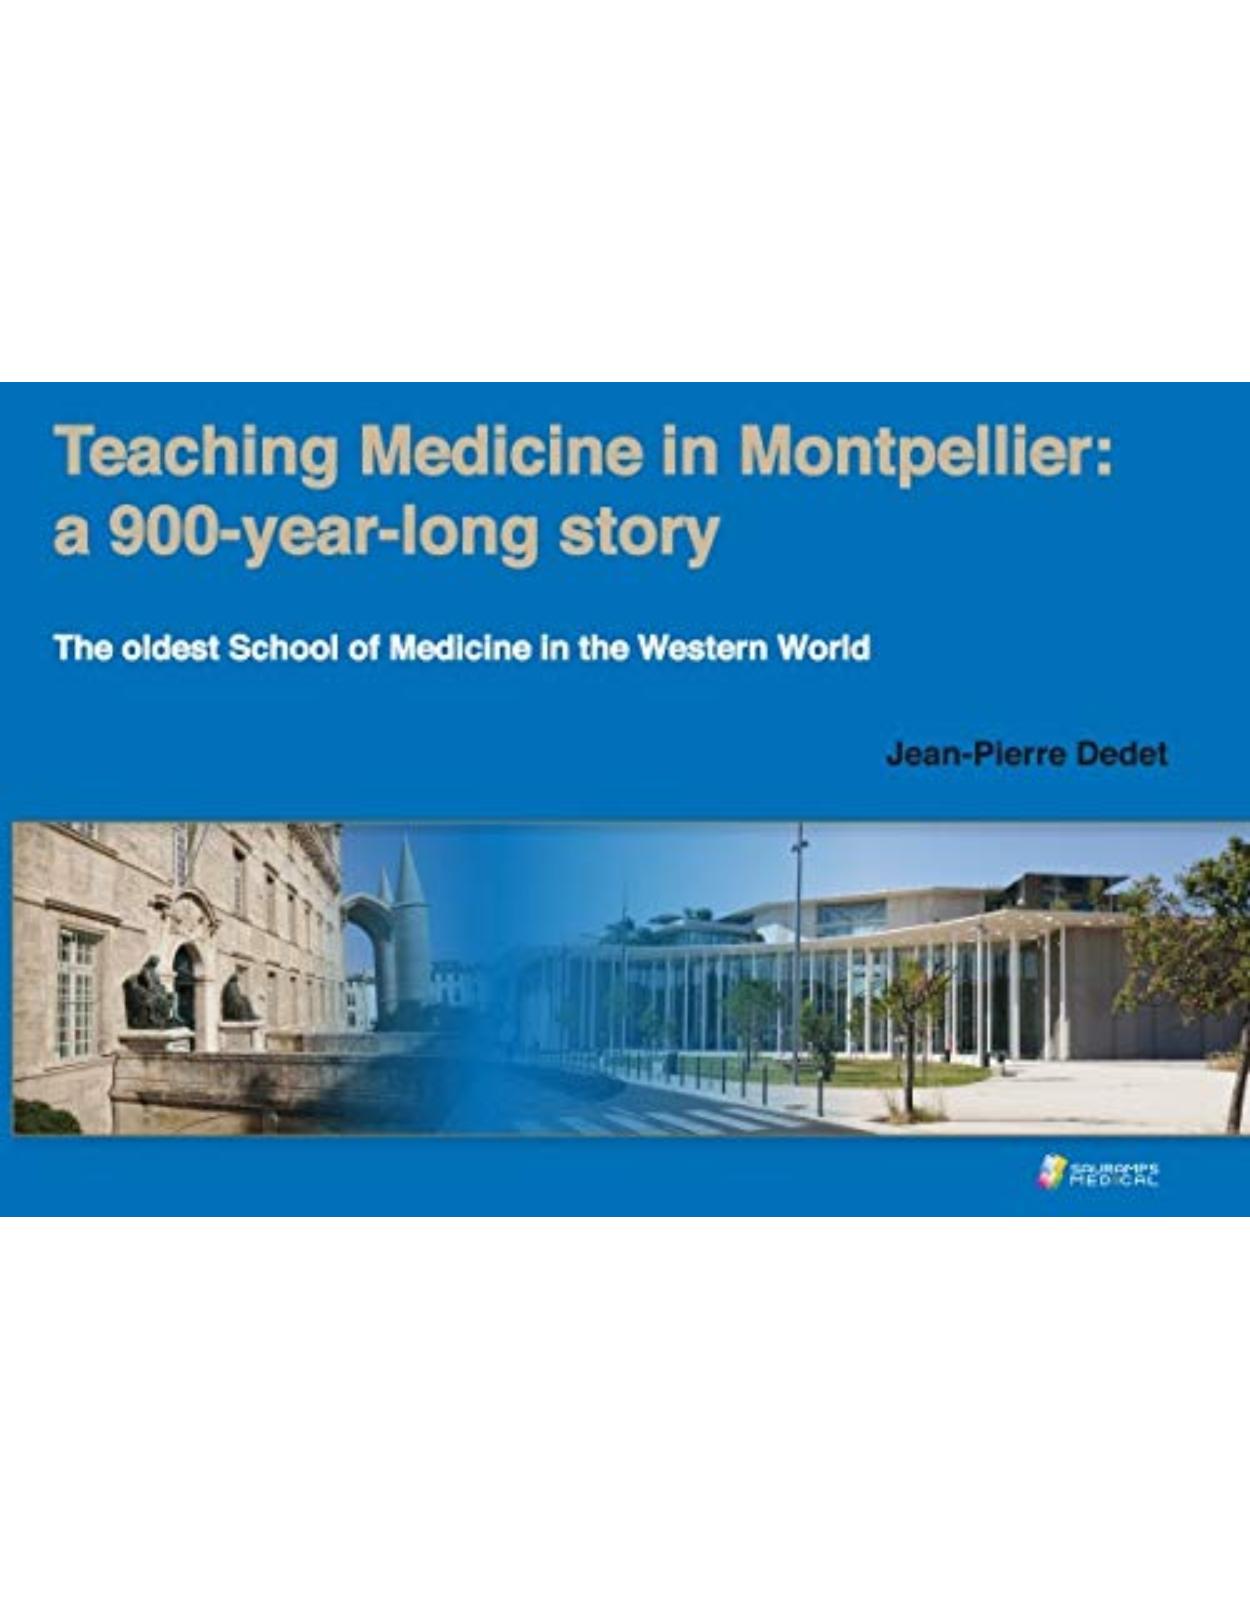 TEACHING MEDICINE IN MONTPELLIER : A 900-YEAR-LONG STORY